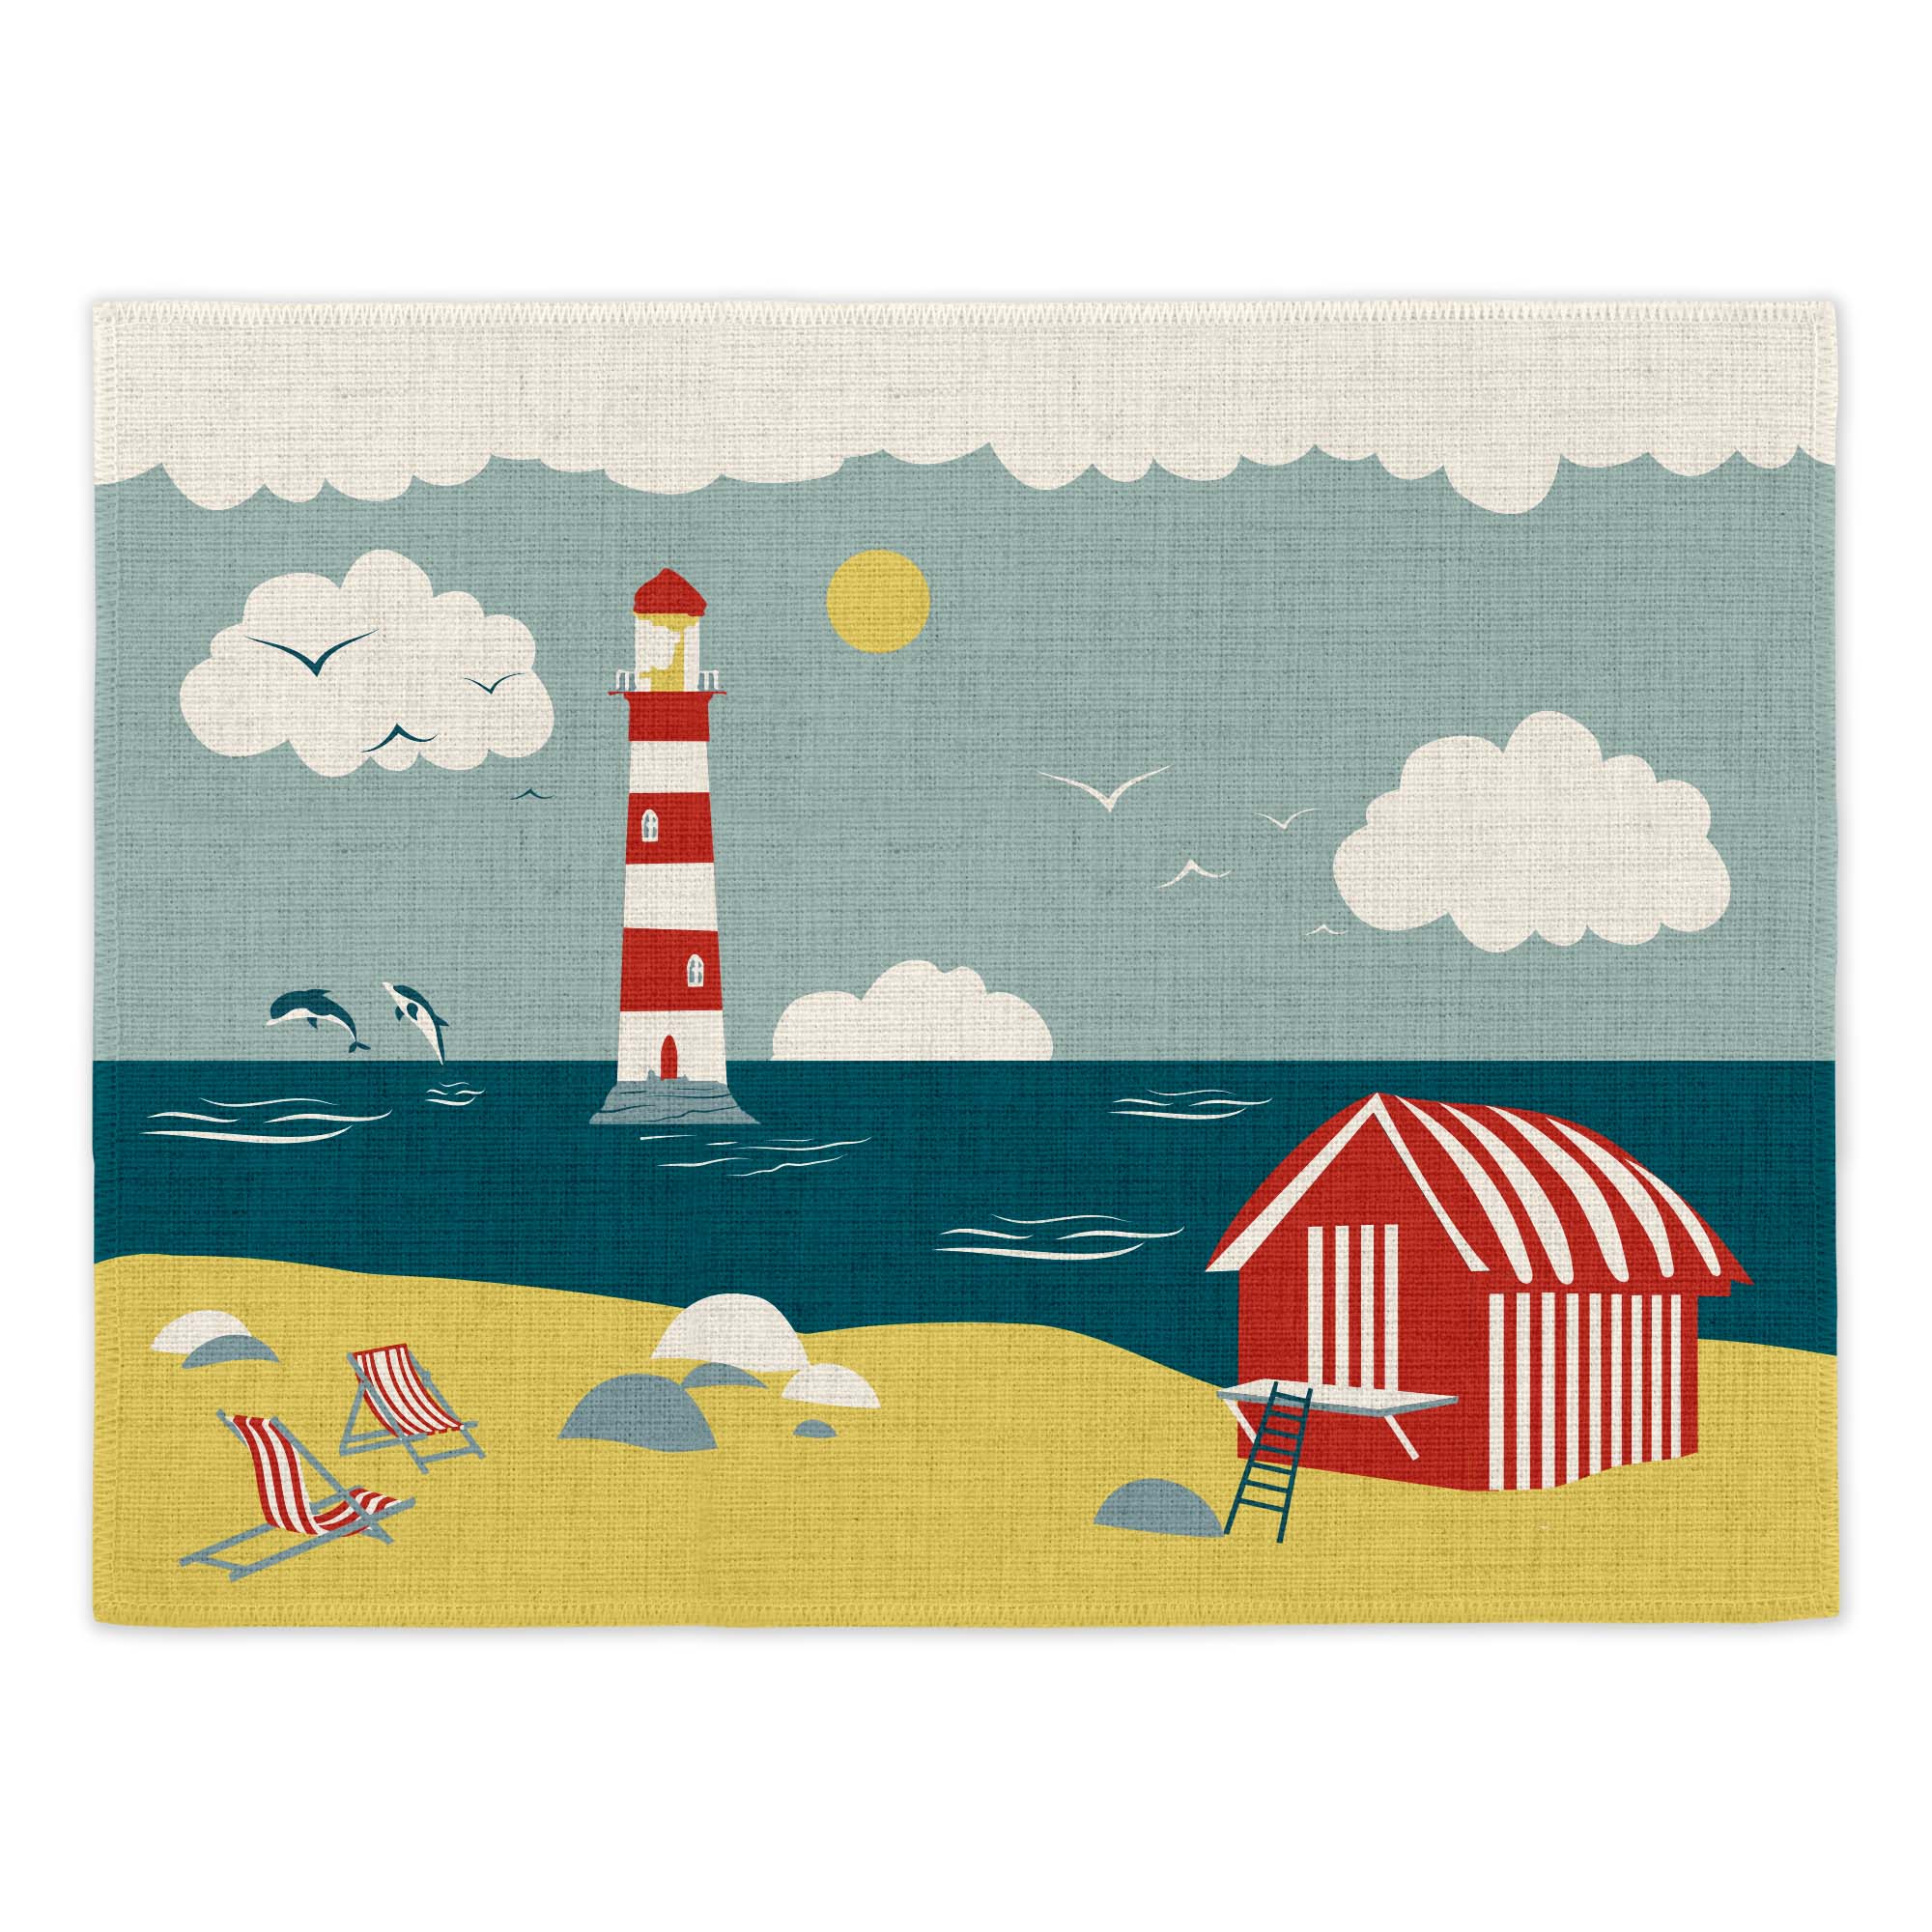 Charlie's Coast Placemats (Set of Four) Placemats Mustard and Gray Ltd Shropshire UK